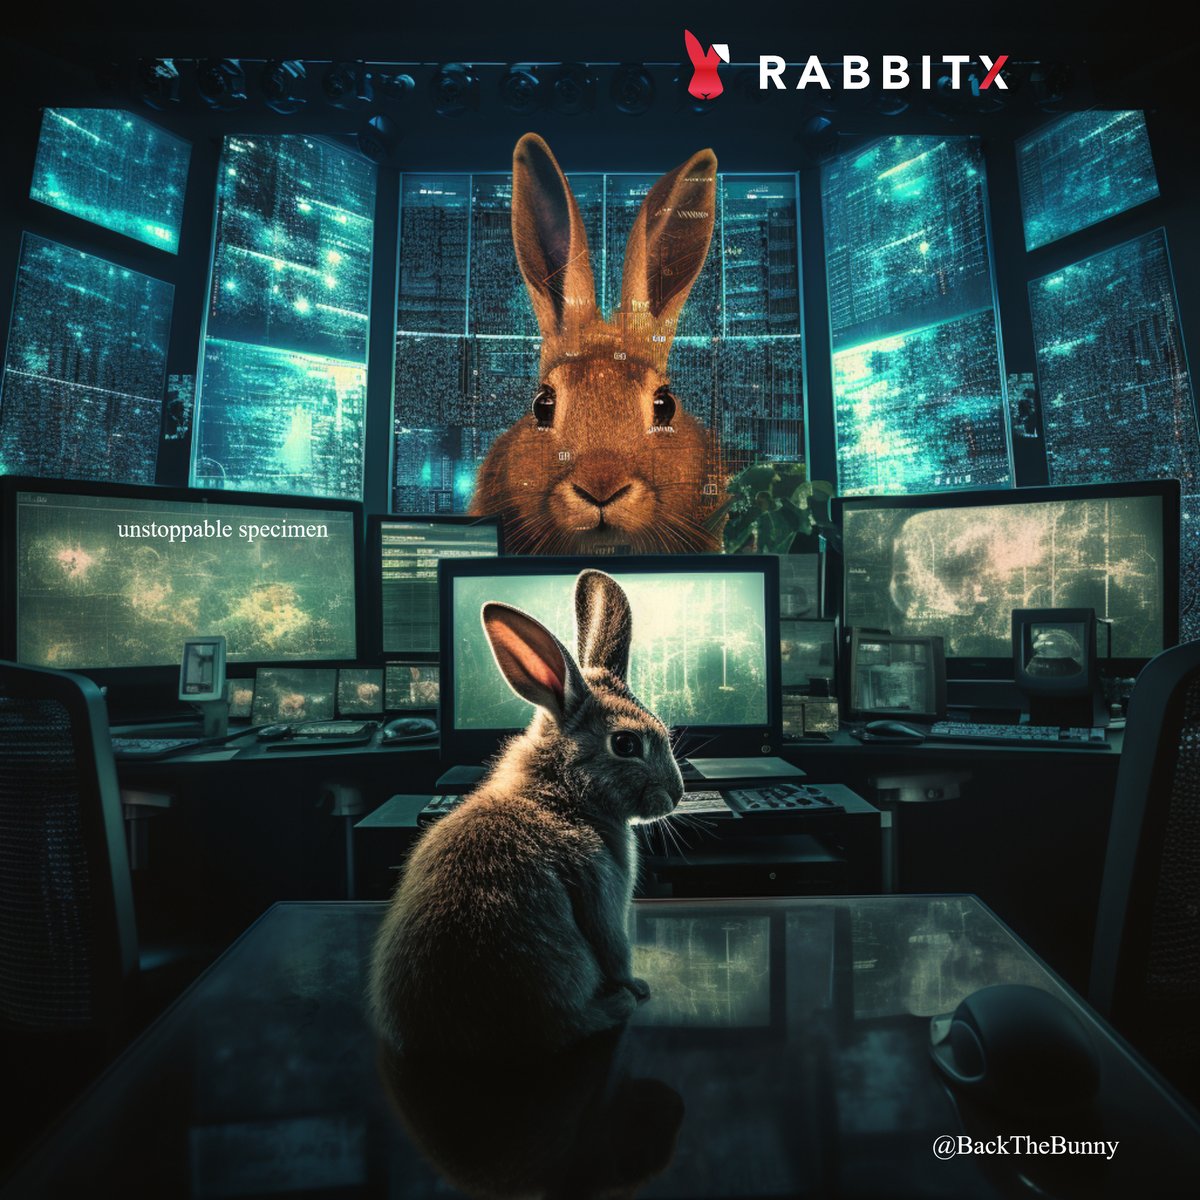 RabbitX Vaults Notice: If you've been staking with RabbitX, we have good news. You've been accruing @elixir points this whole time 🐇 Want to see how much? Go to elixir.xyz/apothecary and connect the same wallet you staked with on RabbitX to see your points. And be sure to…